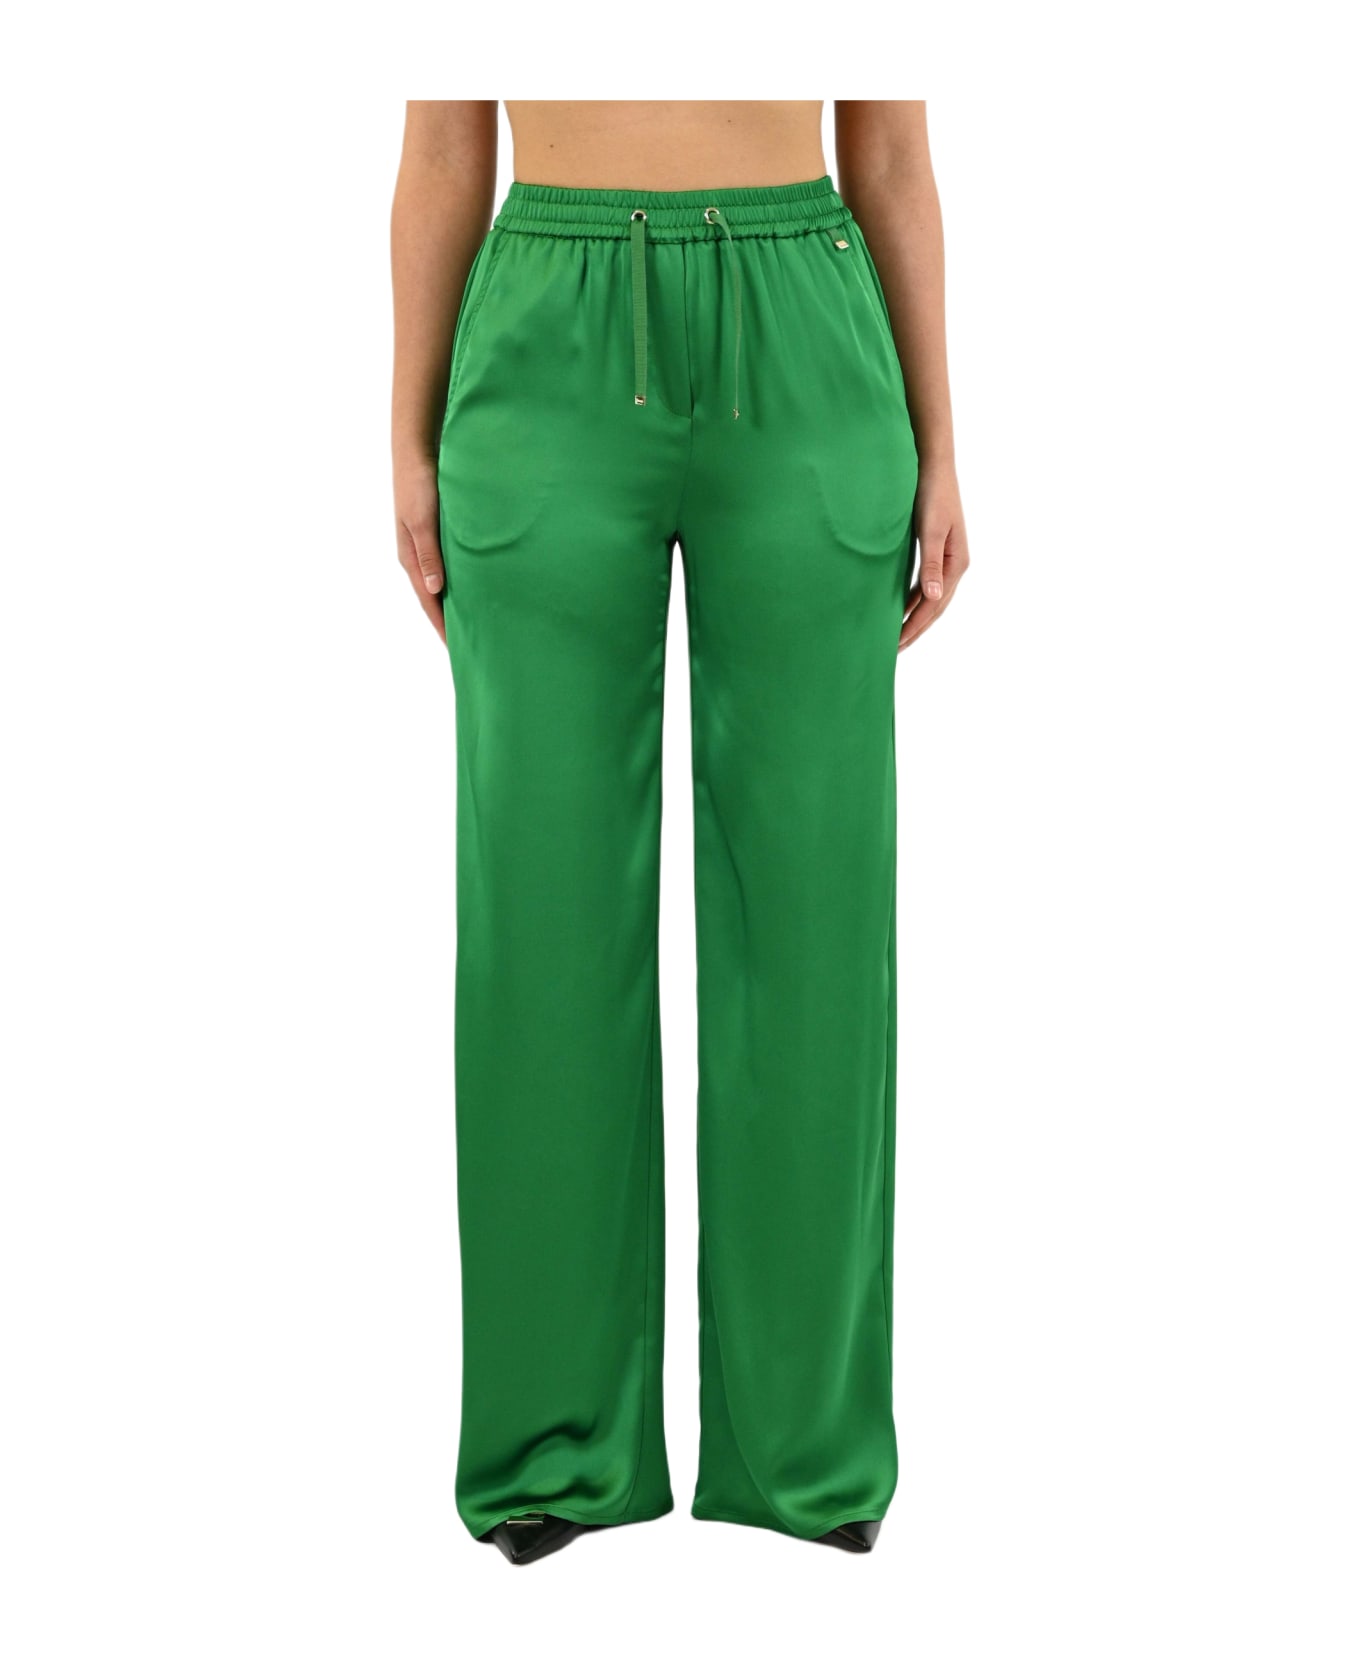 Herno Soft Satin High-waisted Trousers - Green